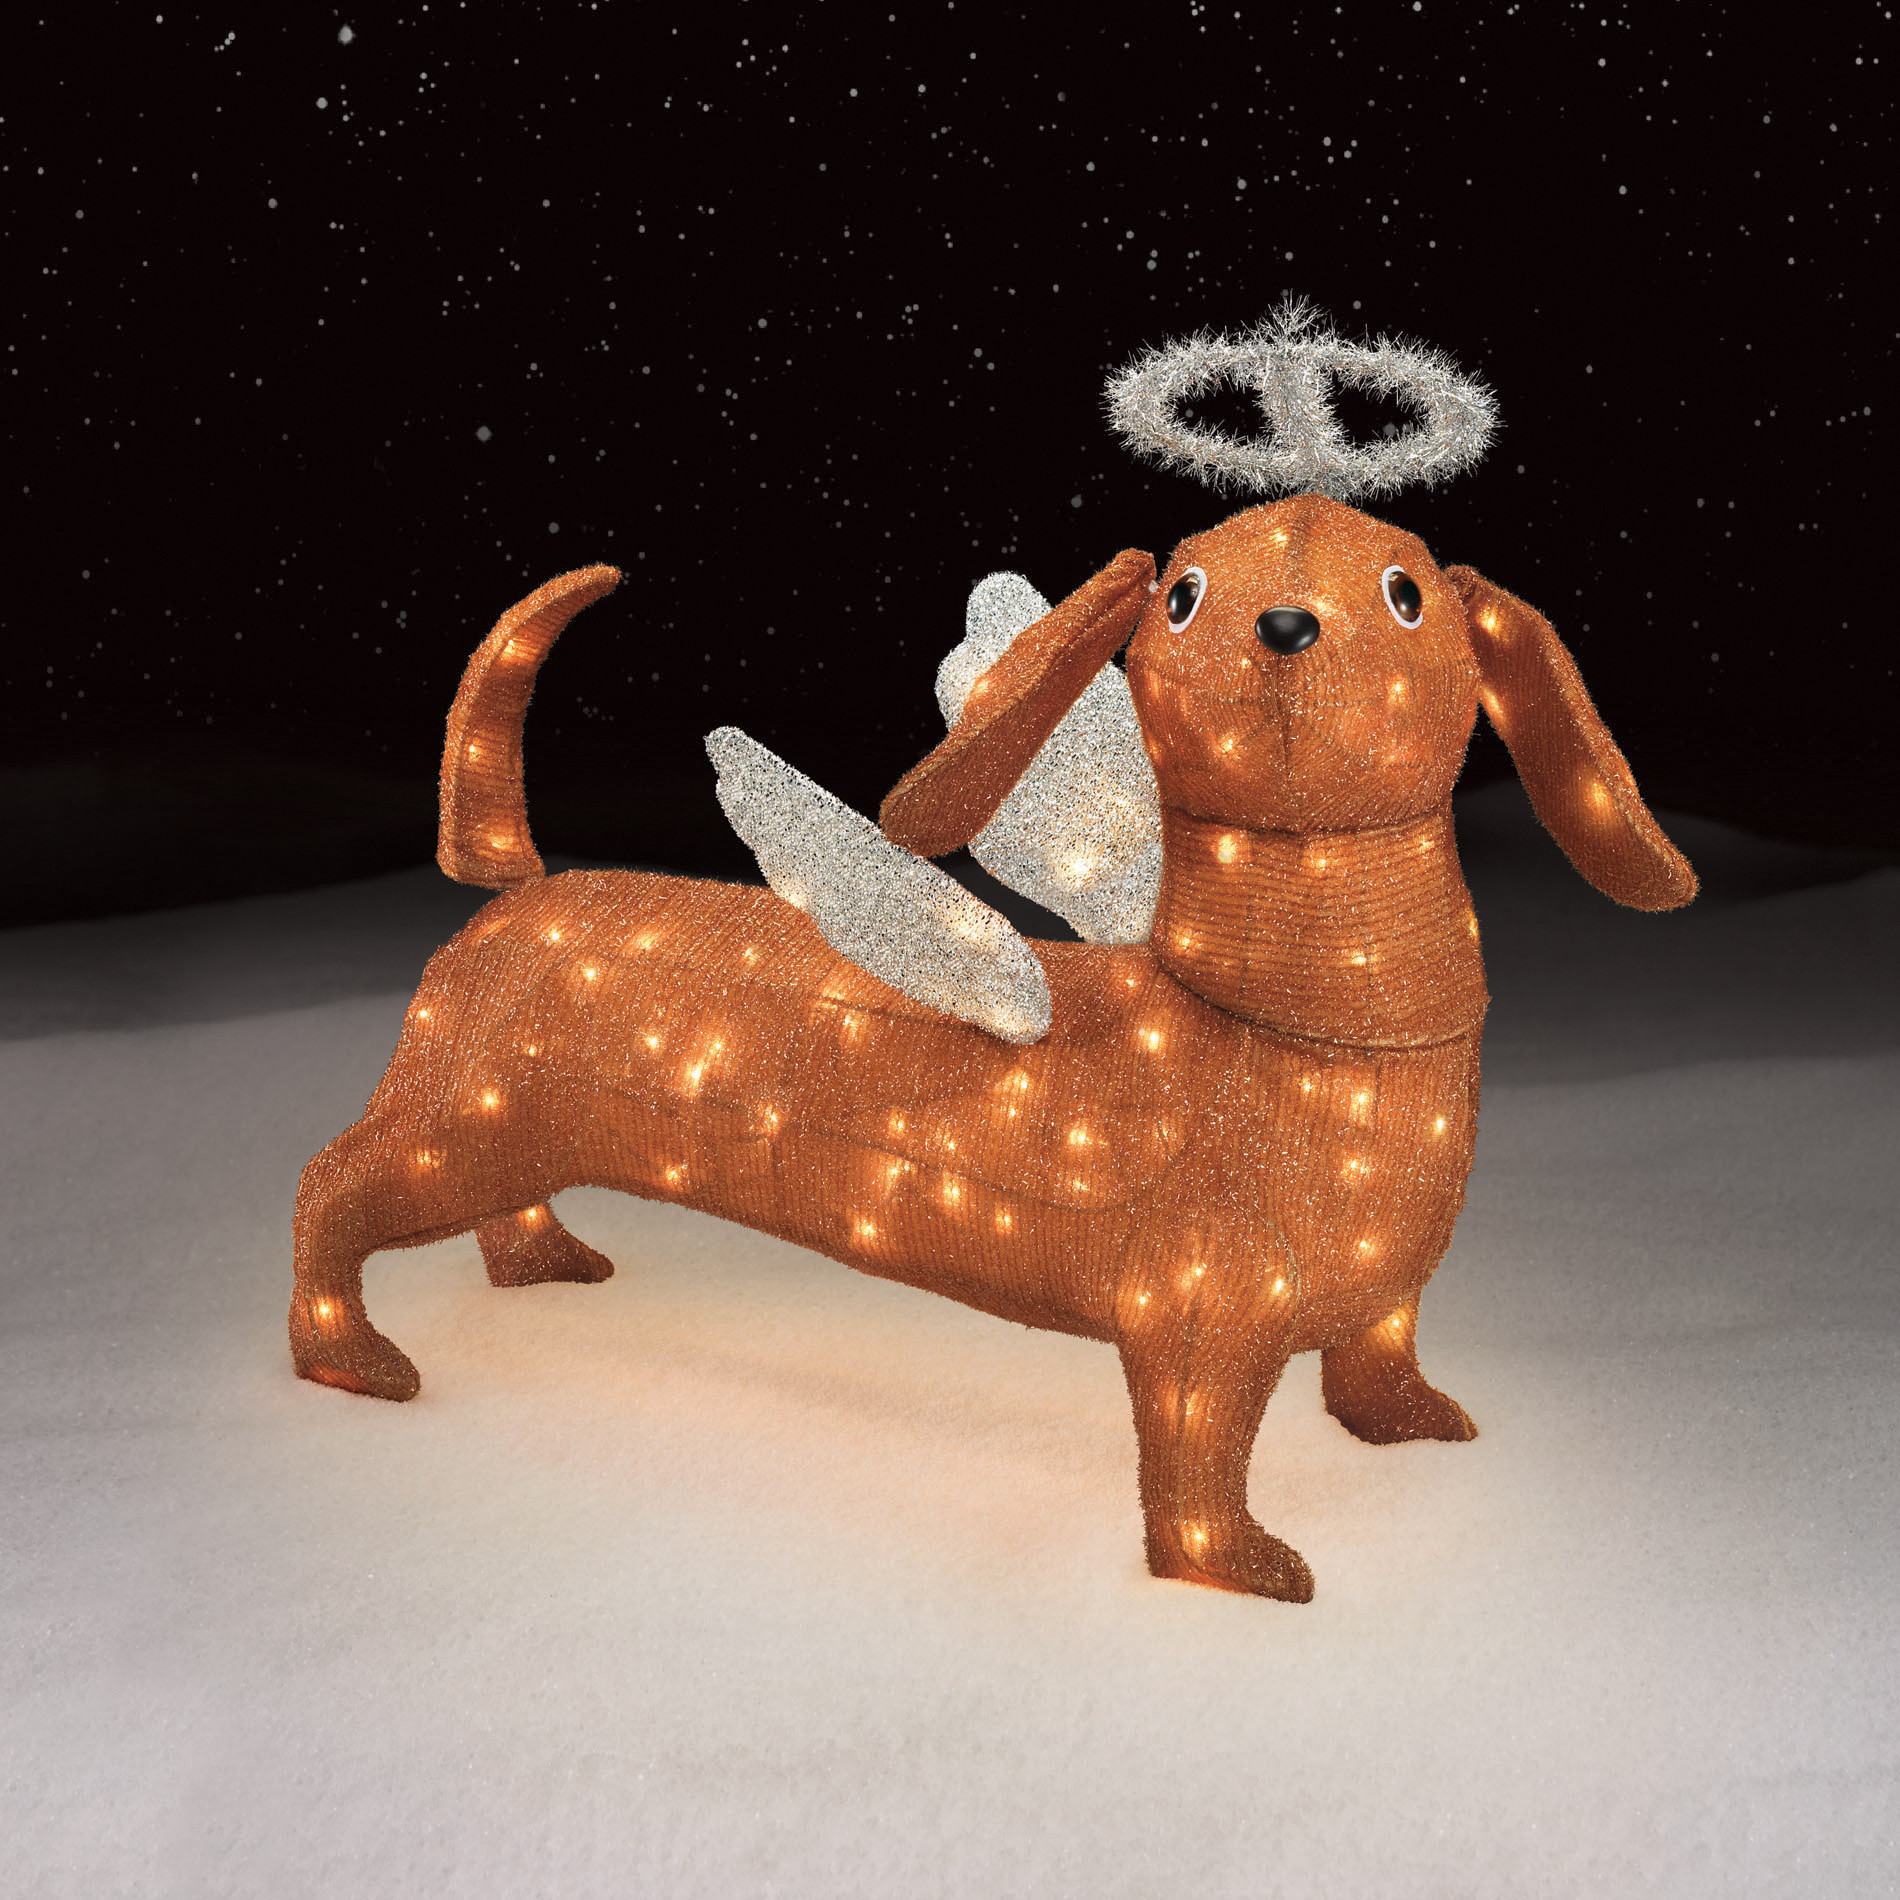 Outdoor Lighted Dog Christmas Decorations
 Trim A Home Angel Dachshund Decoration